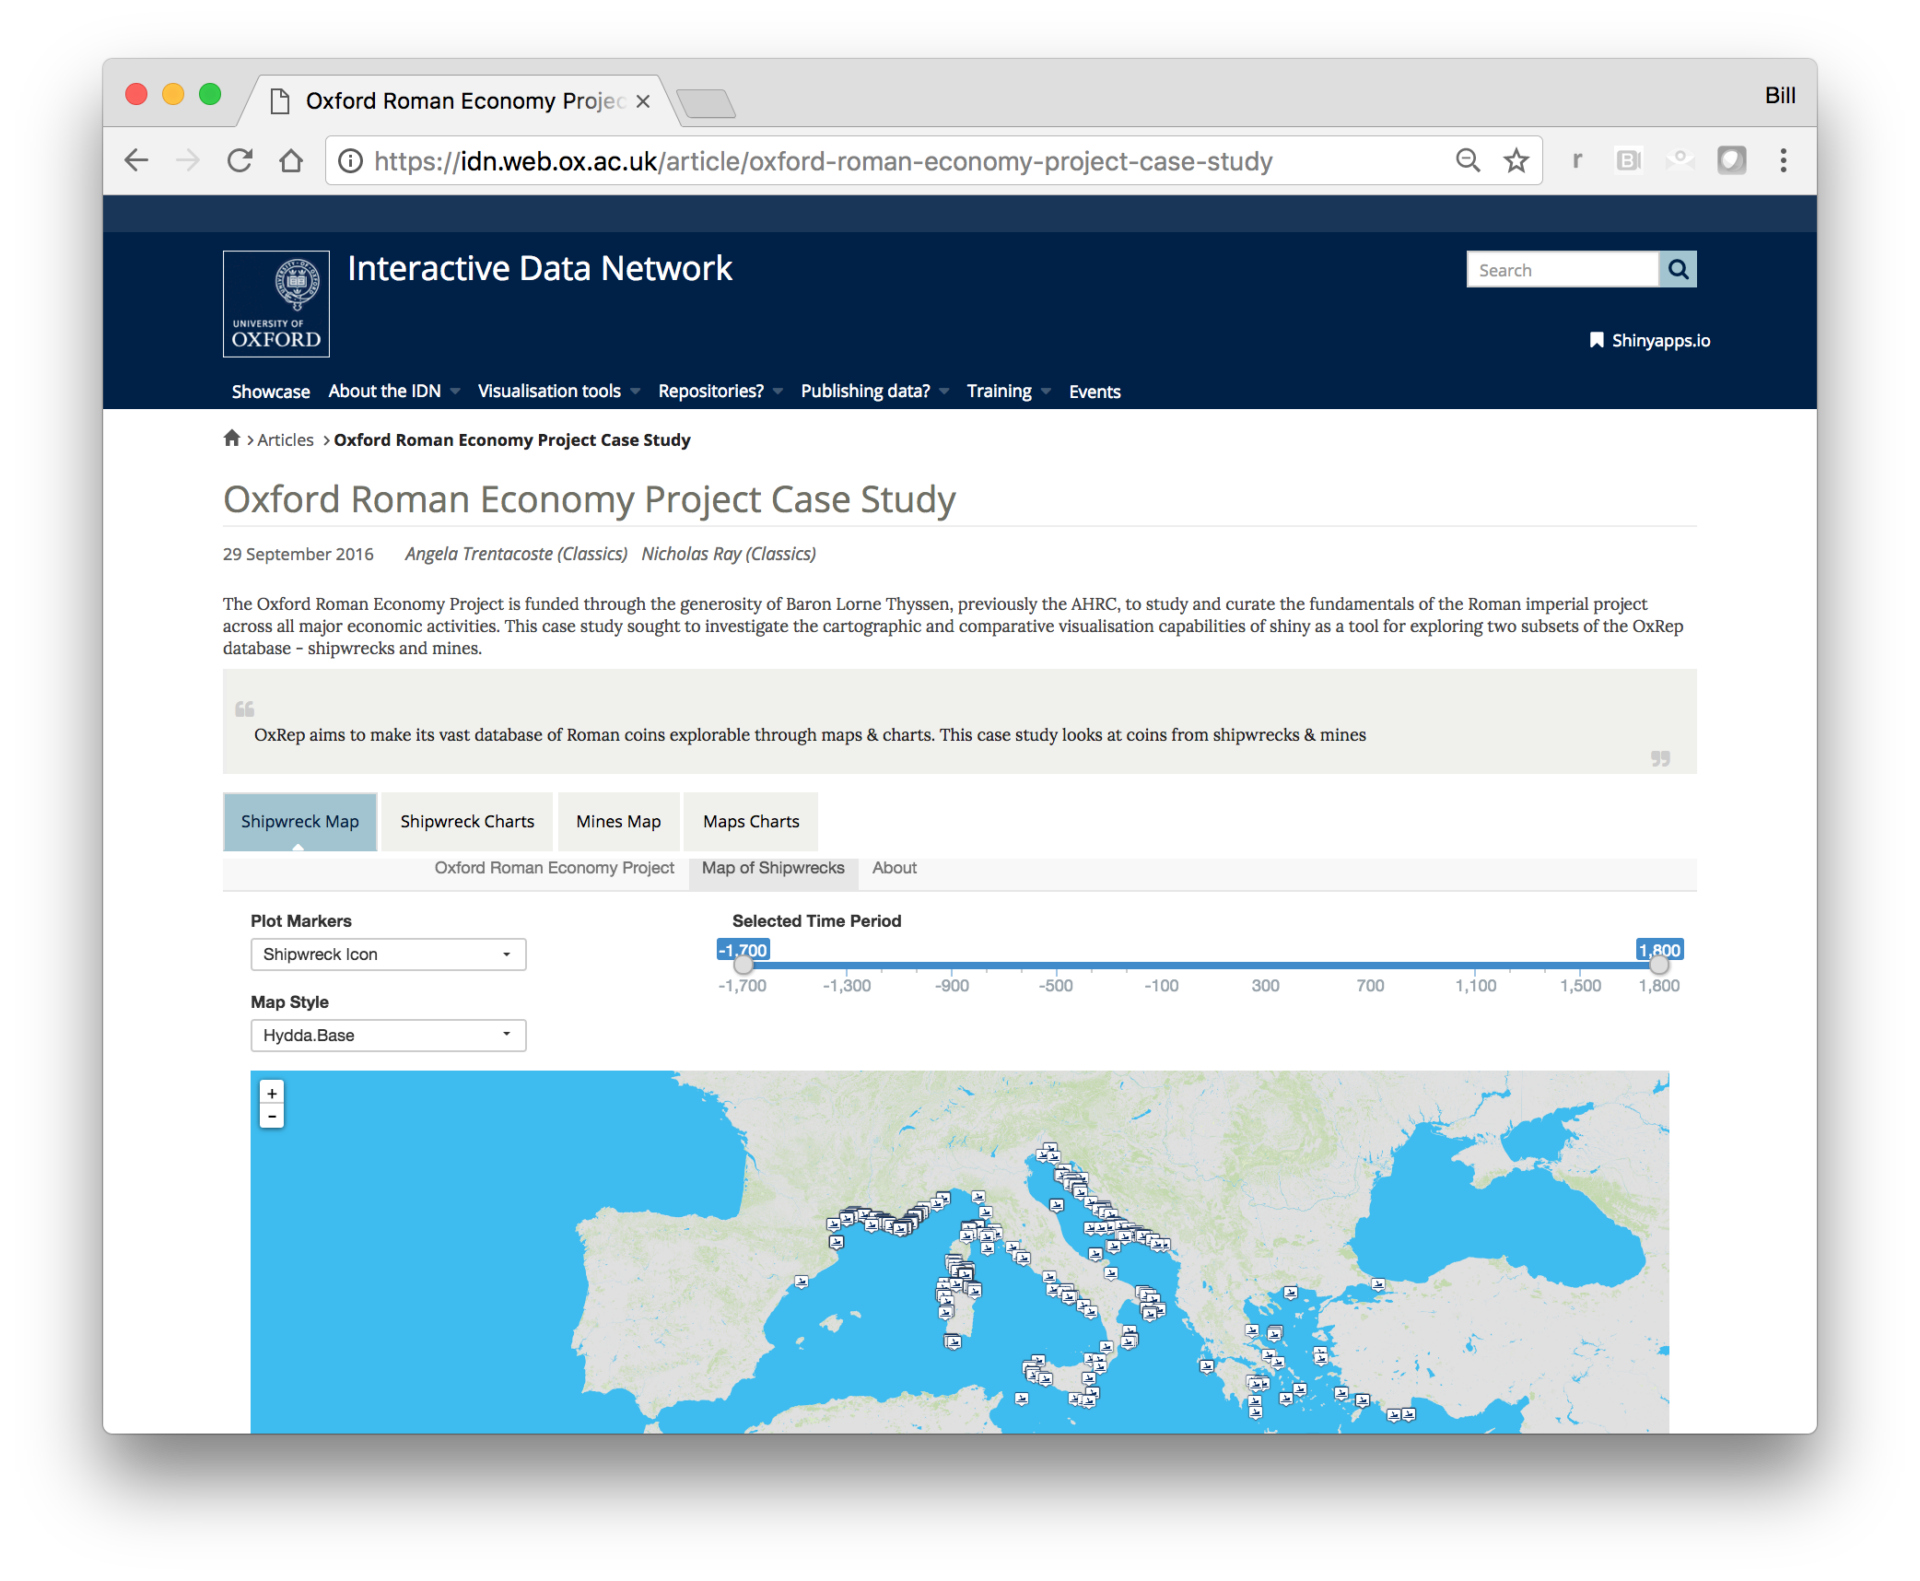 web browser with Oxford Roman Economy Project Case Study and an interactive data network map of Europe